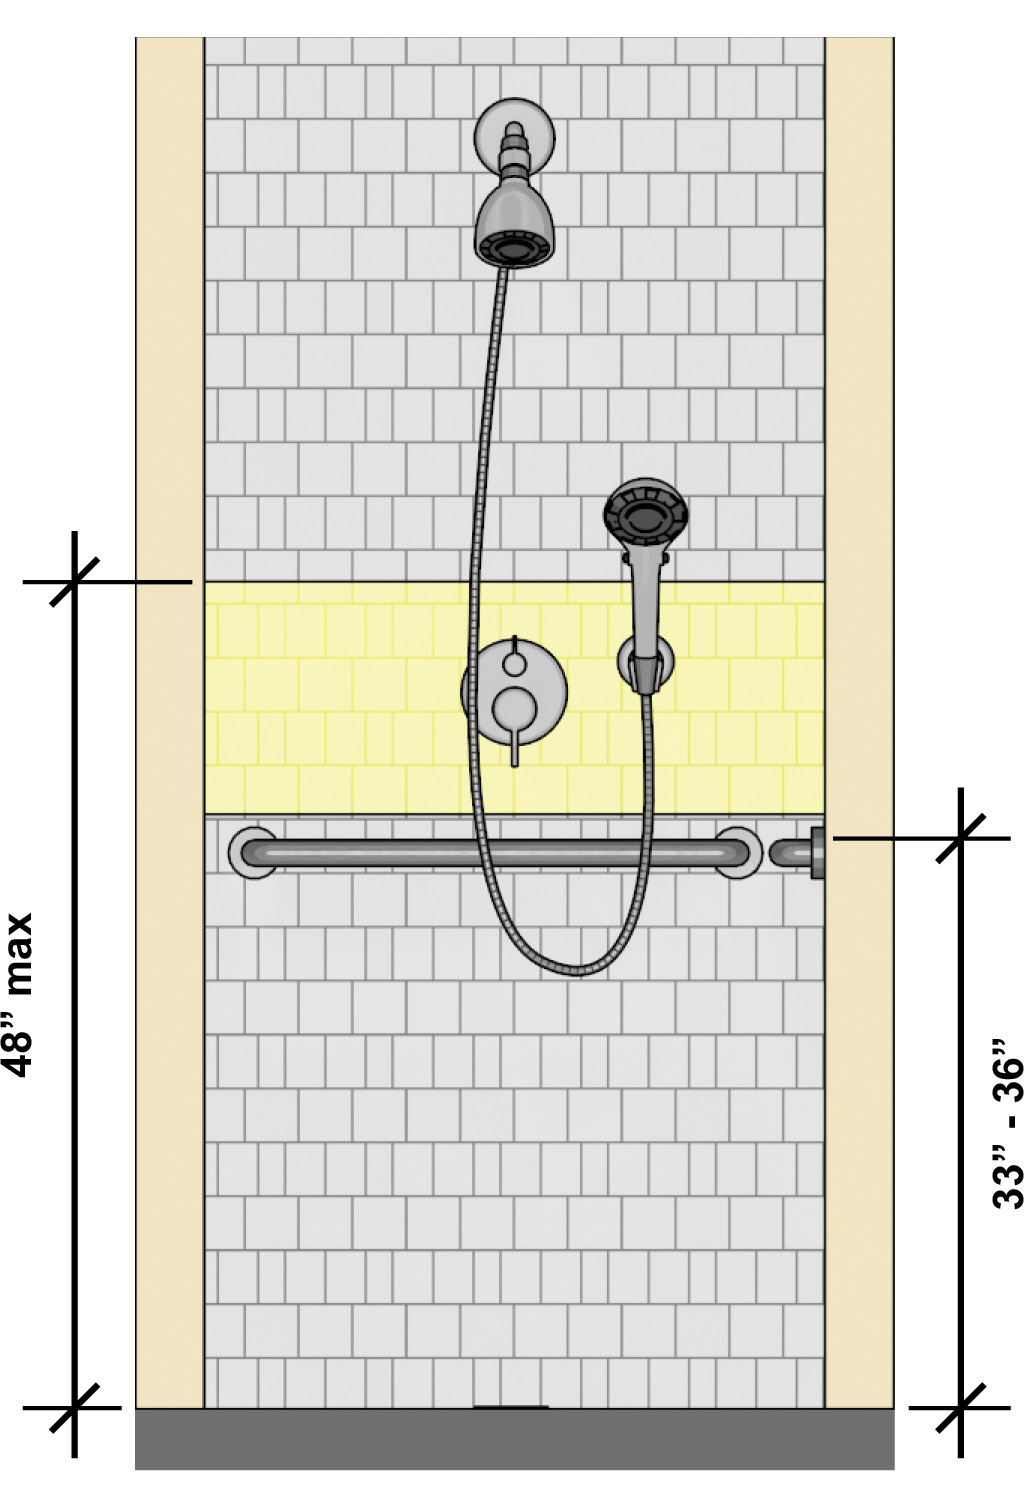 Elevation of side wall shows controls and shower spray unit located
above the grab bar and below a maximum height of 48 inches. The grab bar is 33 inches
to 36 inches high measured to the top of the gripping
surface.